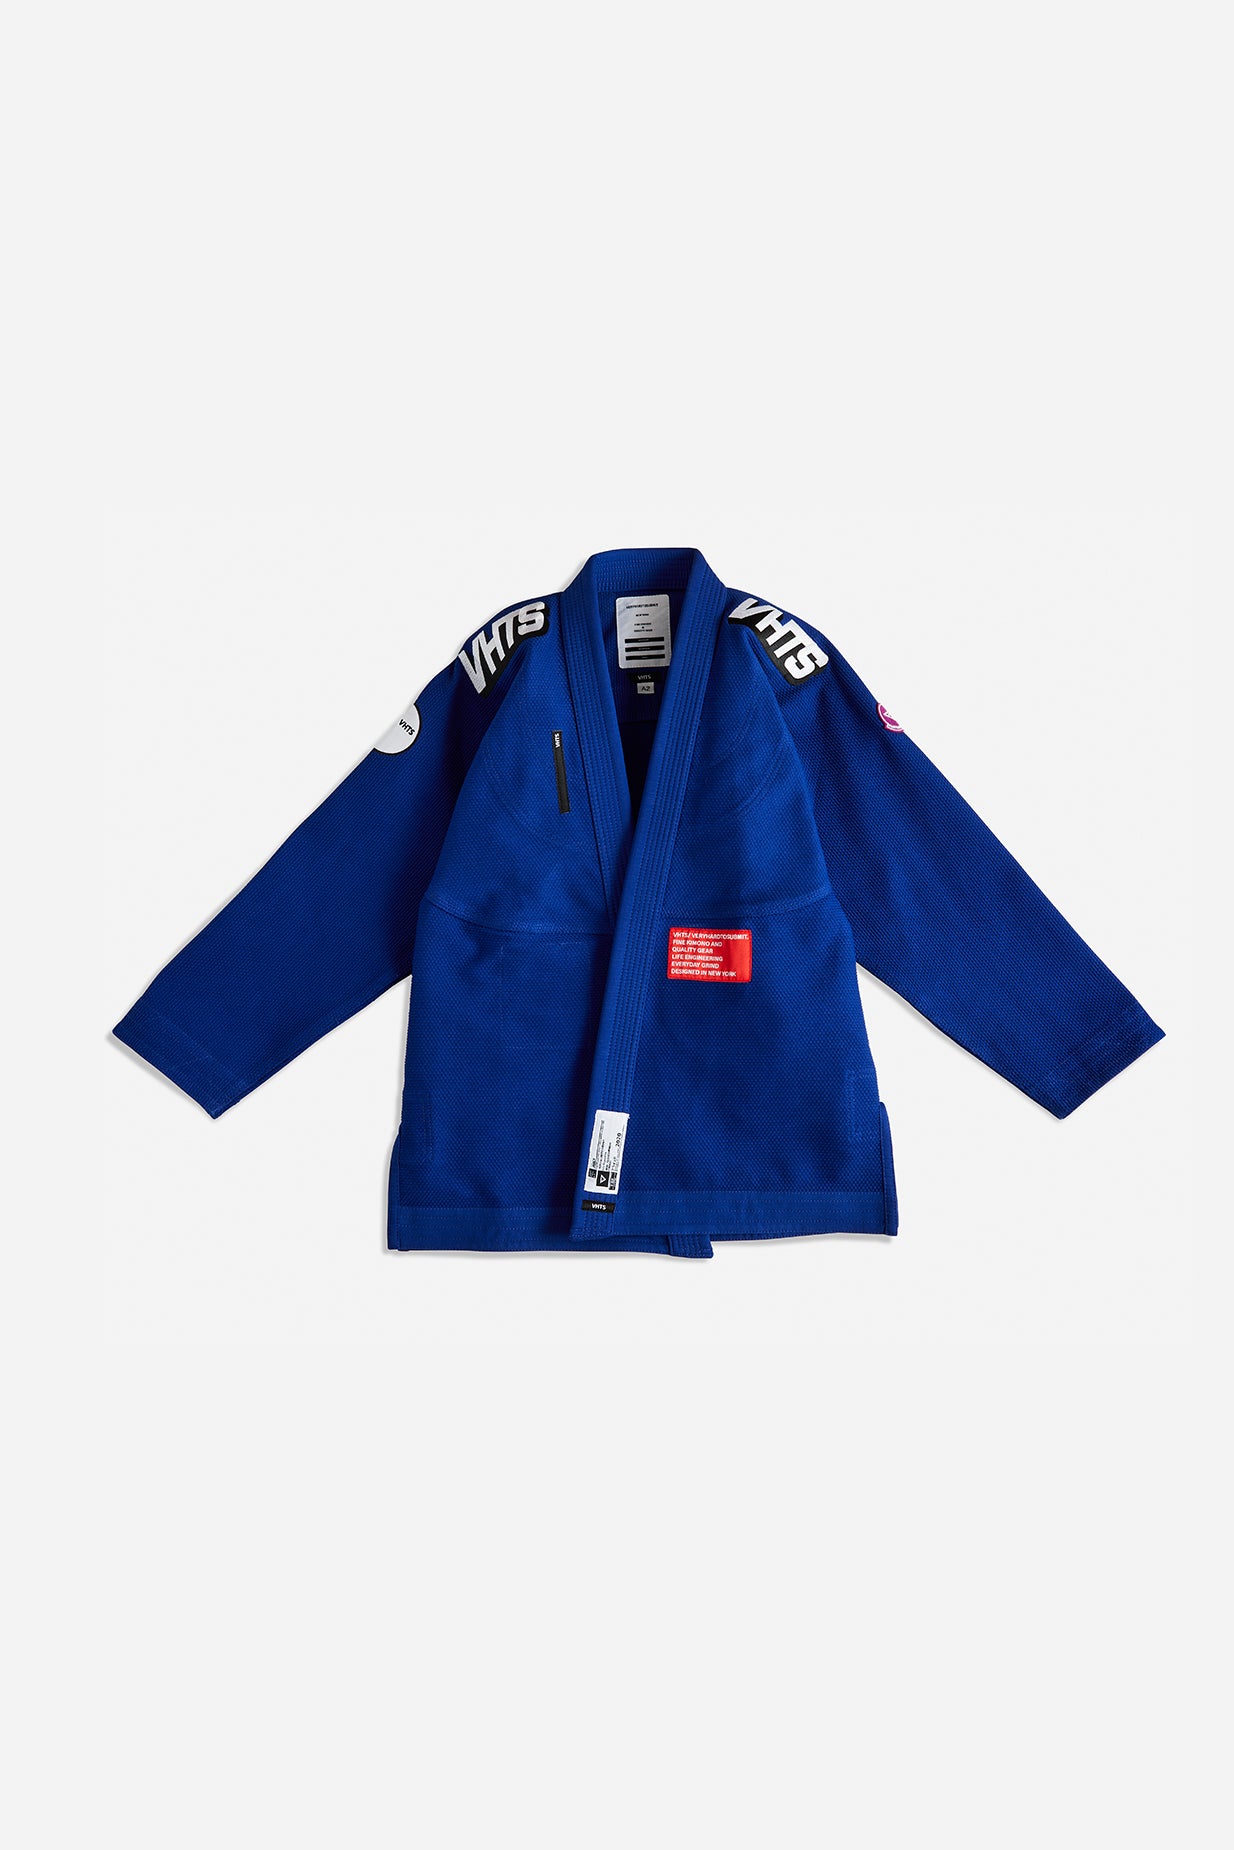 Brazilian Jiu Jitsu Gi G 2020 Jacket 550 GSM pearl weave EVA foam lapel Wide sleeve tape High quality embroidery Pants 9 oz Rip stop cotton fabric Flat rip stop draw string Two belt loop system Triangle knee pad   3 Colors: Blue,White and Black   vhts europe